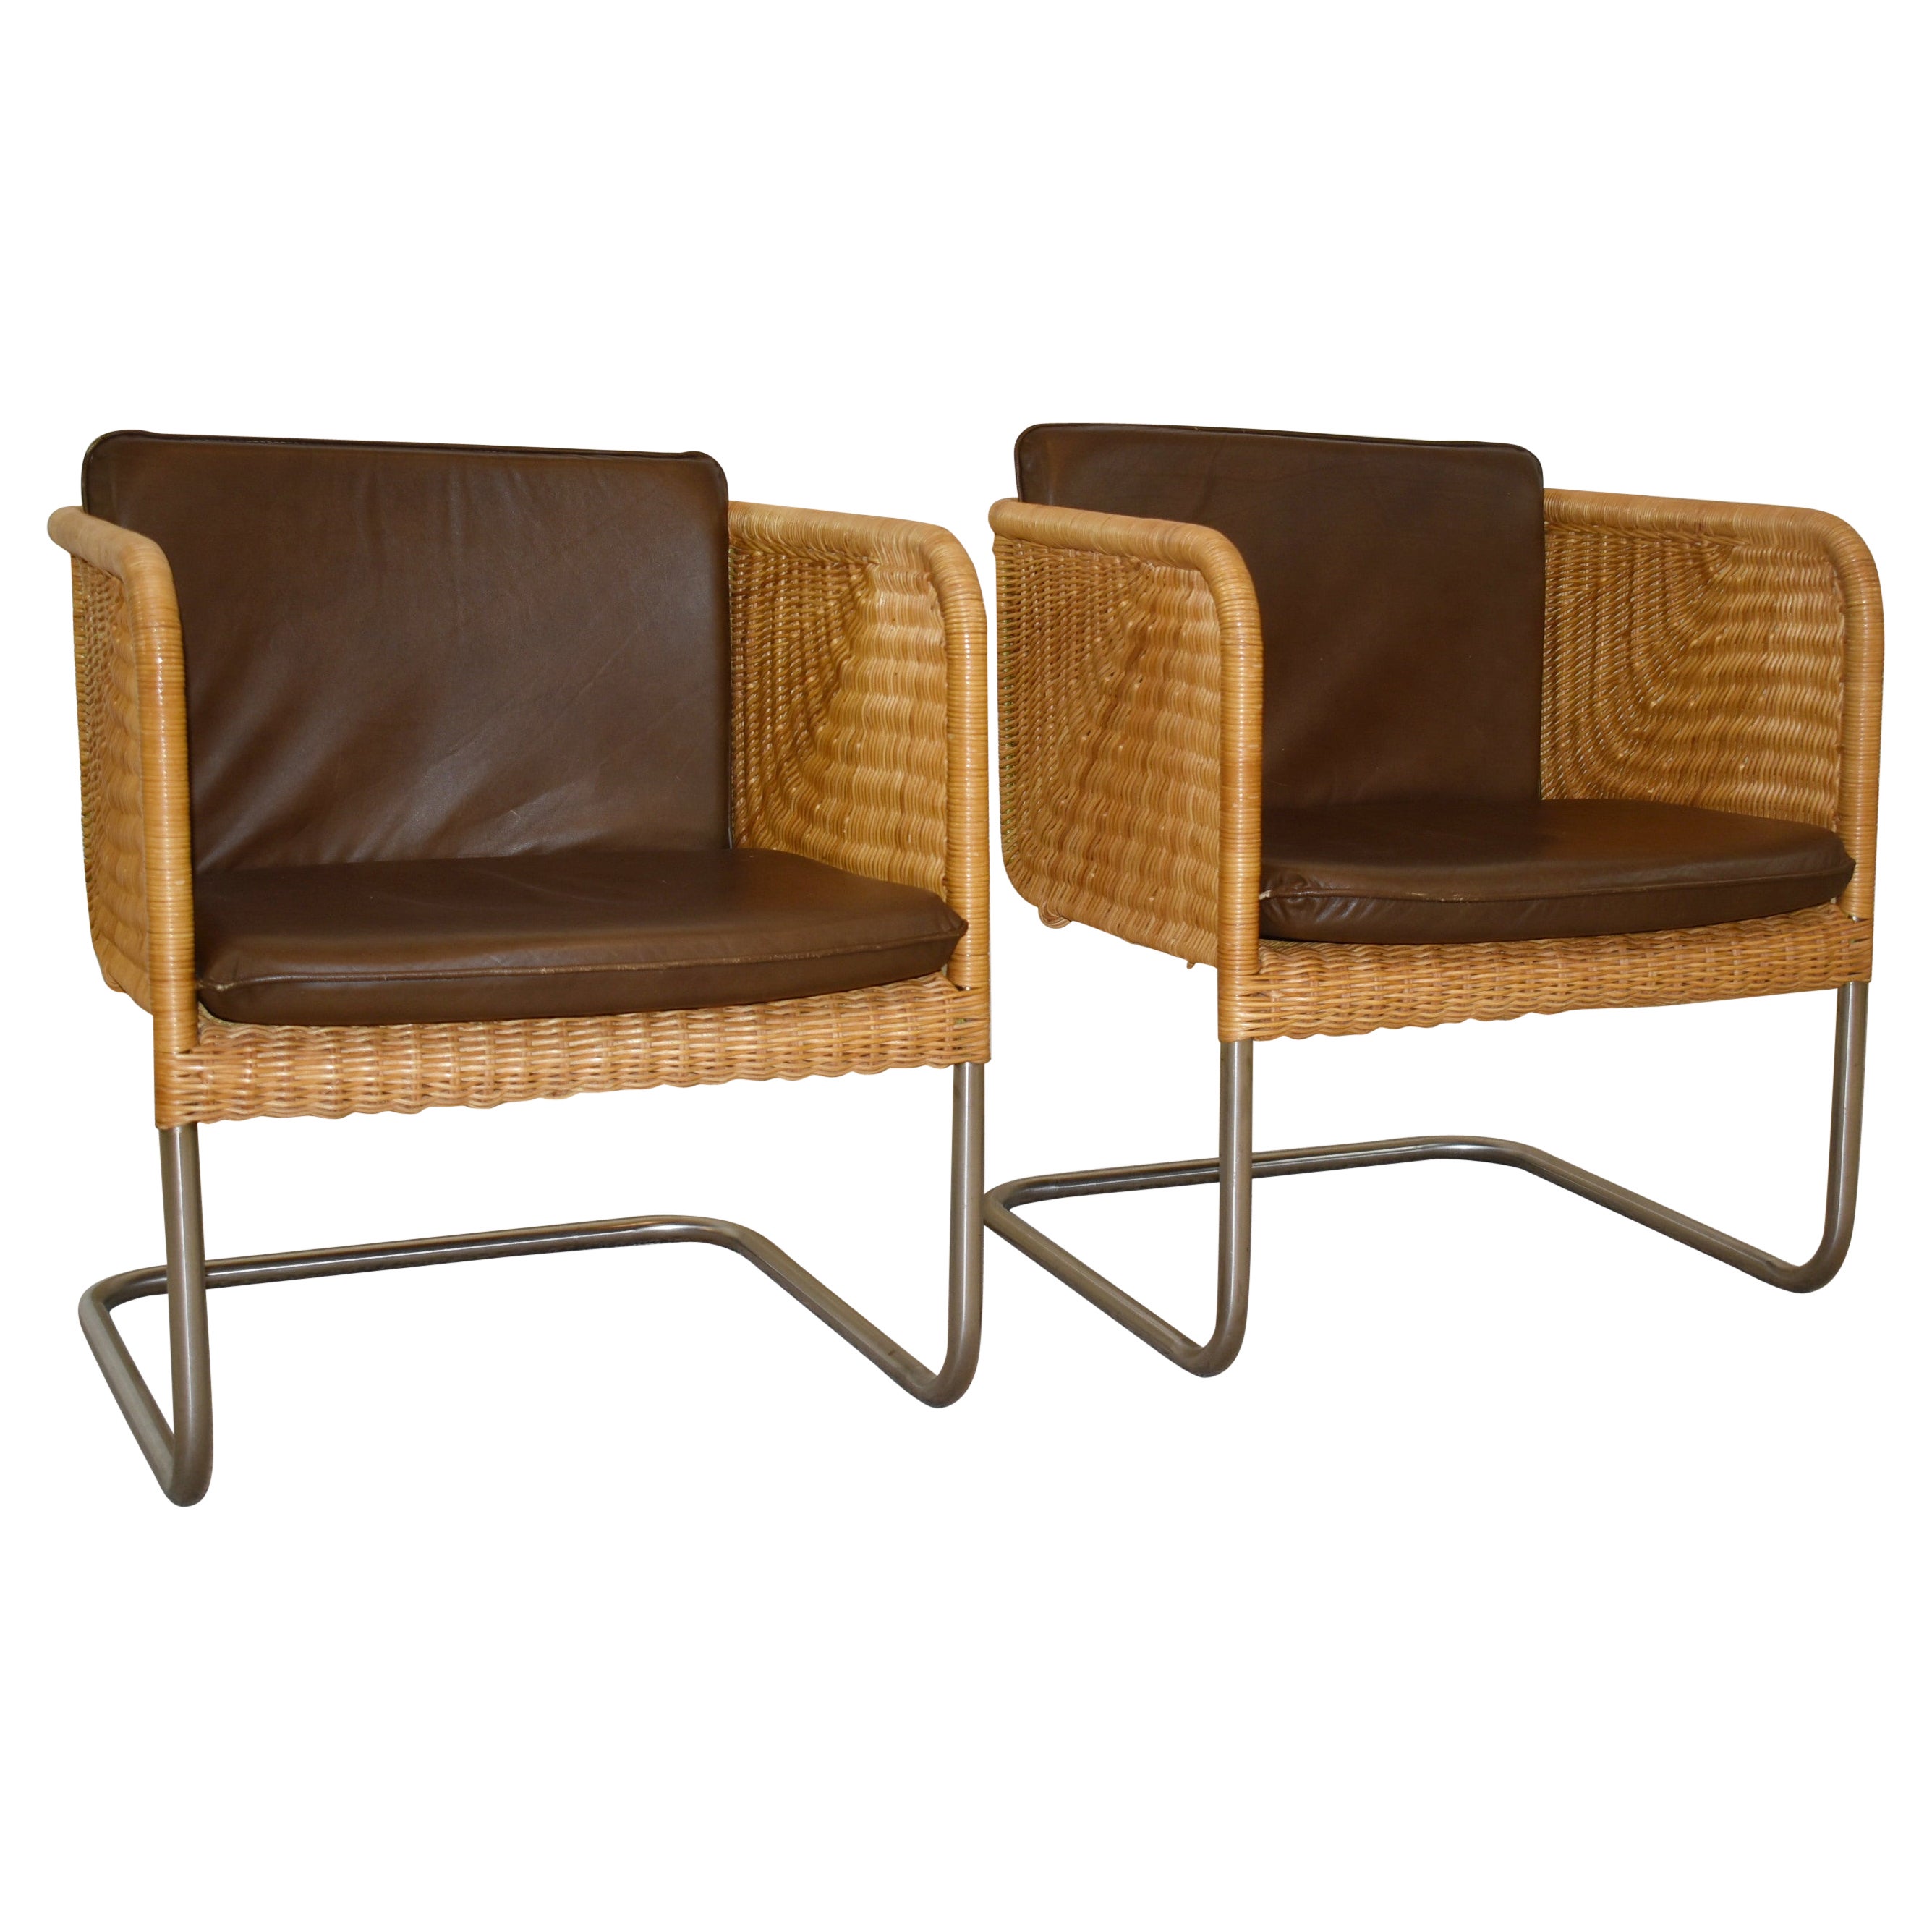 Pair Vintage Harvey Probber Wicker & Chrome Chairs Leather Cushions D43 Model For Sale